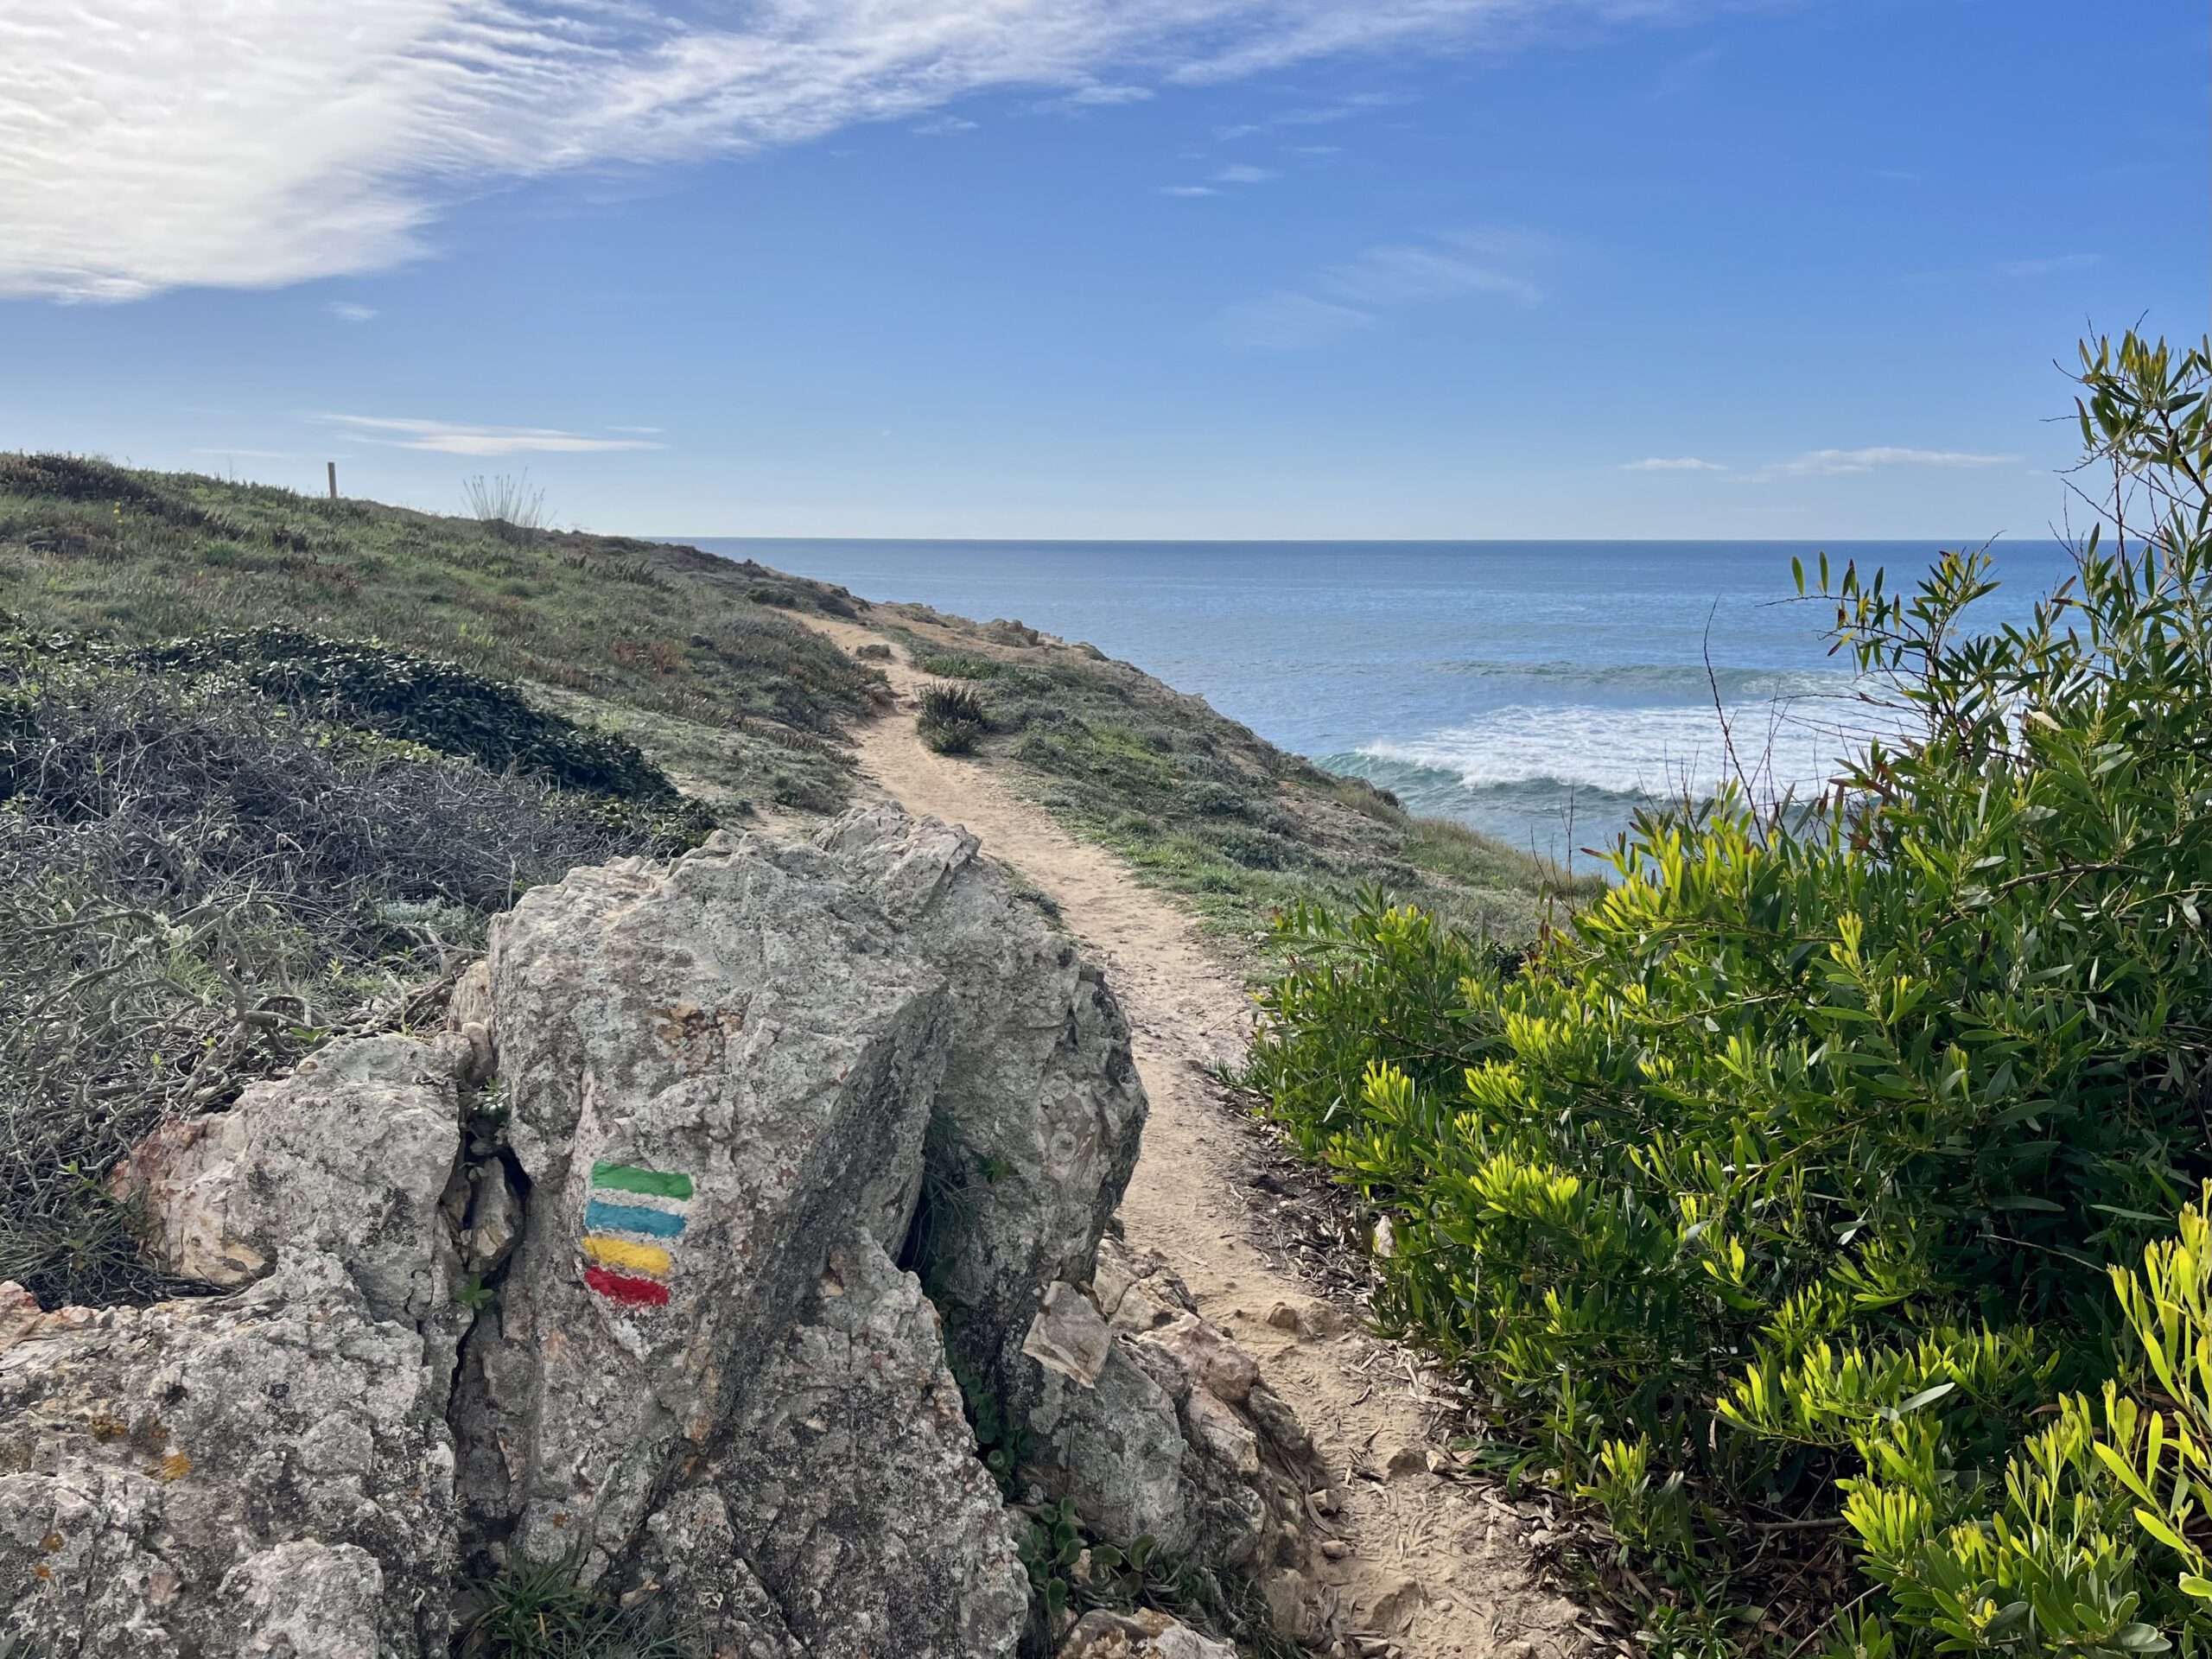 A single track on the coast of Portugal, with a hiking mark on a stone